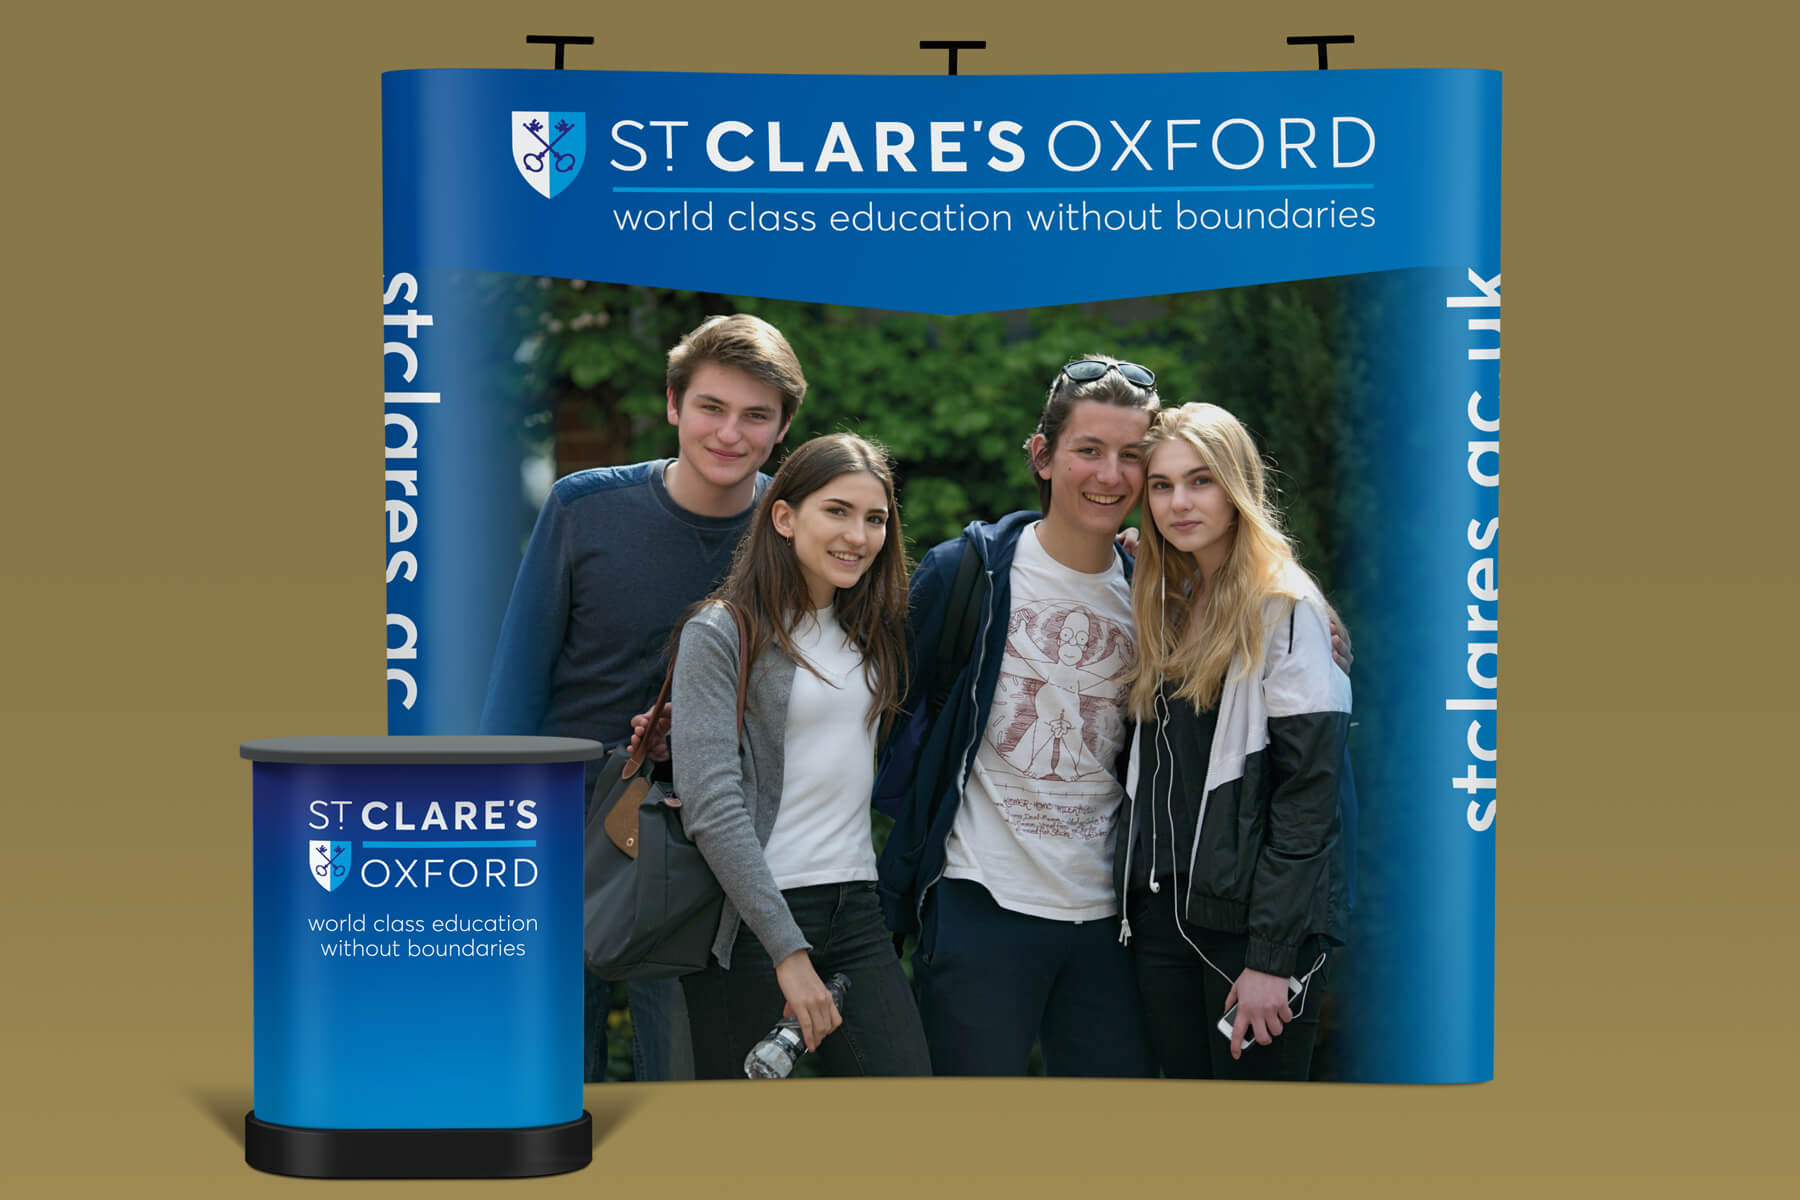 Display stand for St Clare's Oxford